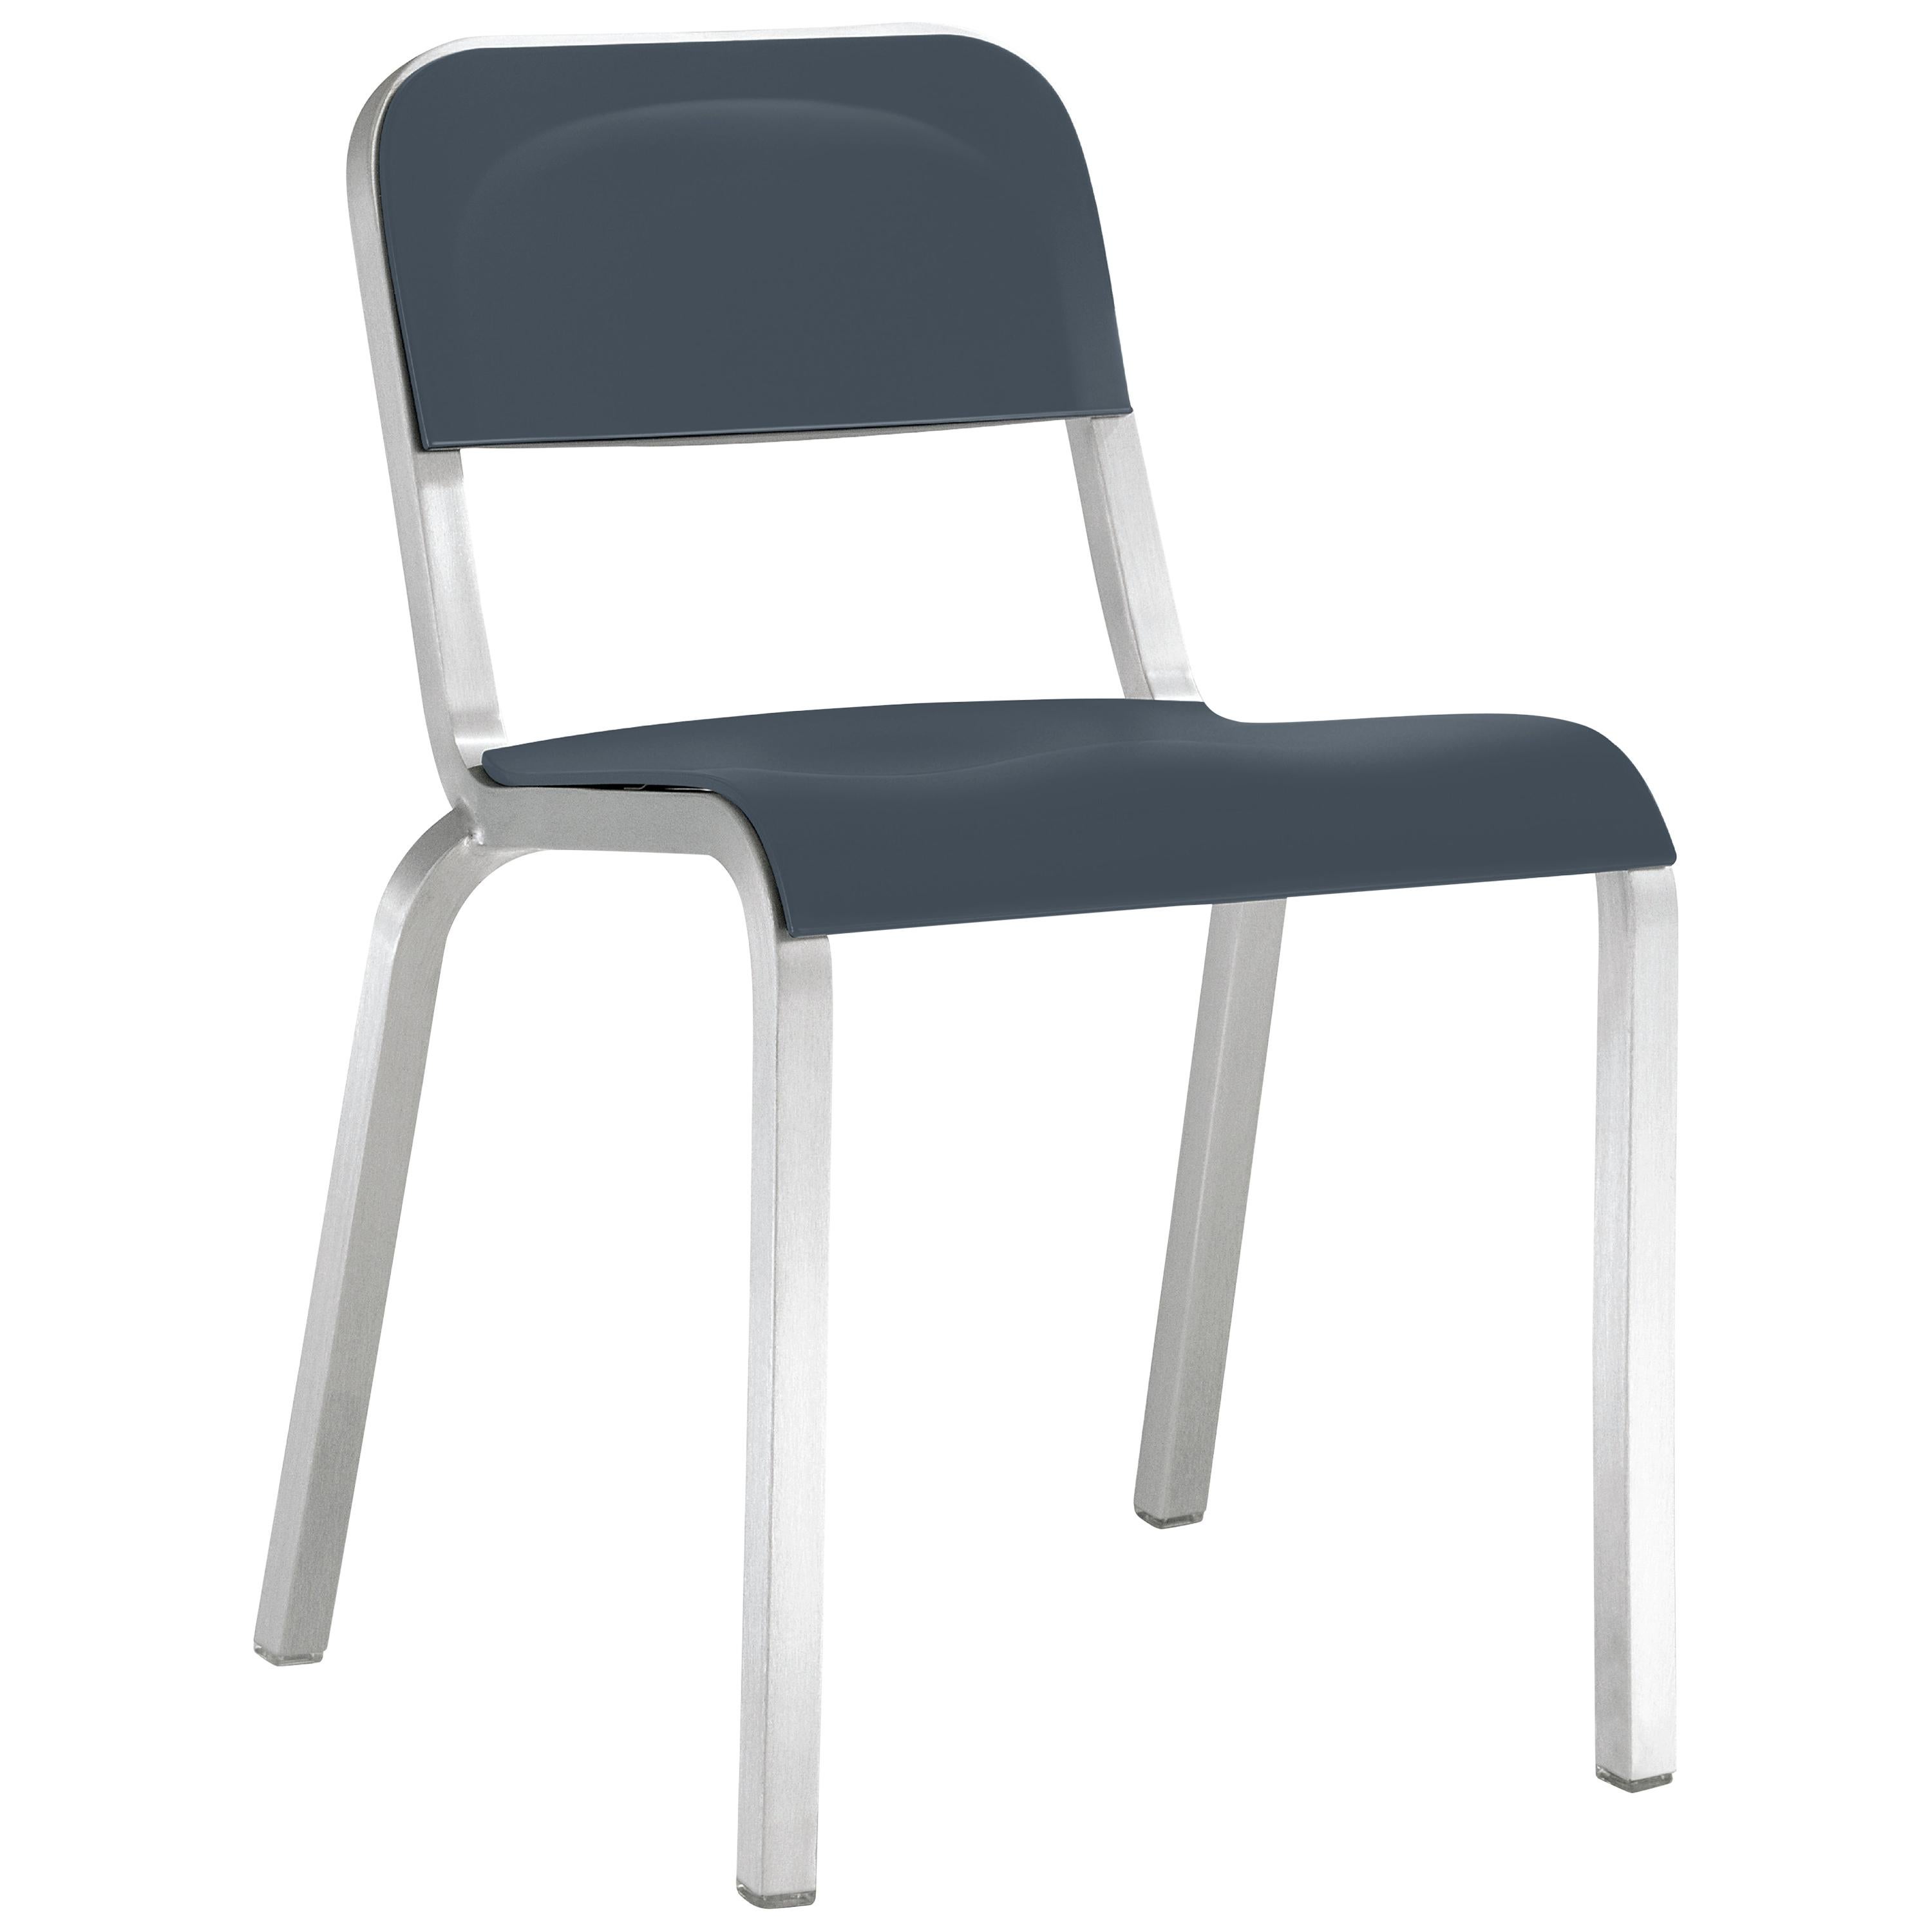 Emeco 1951 Aluminum Stacking Chair with Dark Blue Seat by Adrian Van Hooydonk